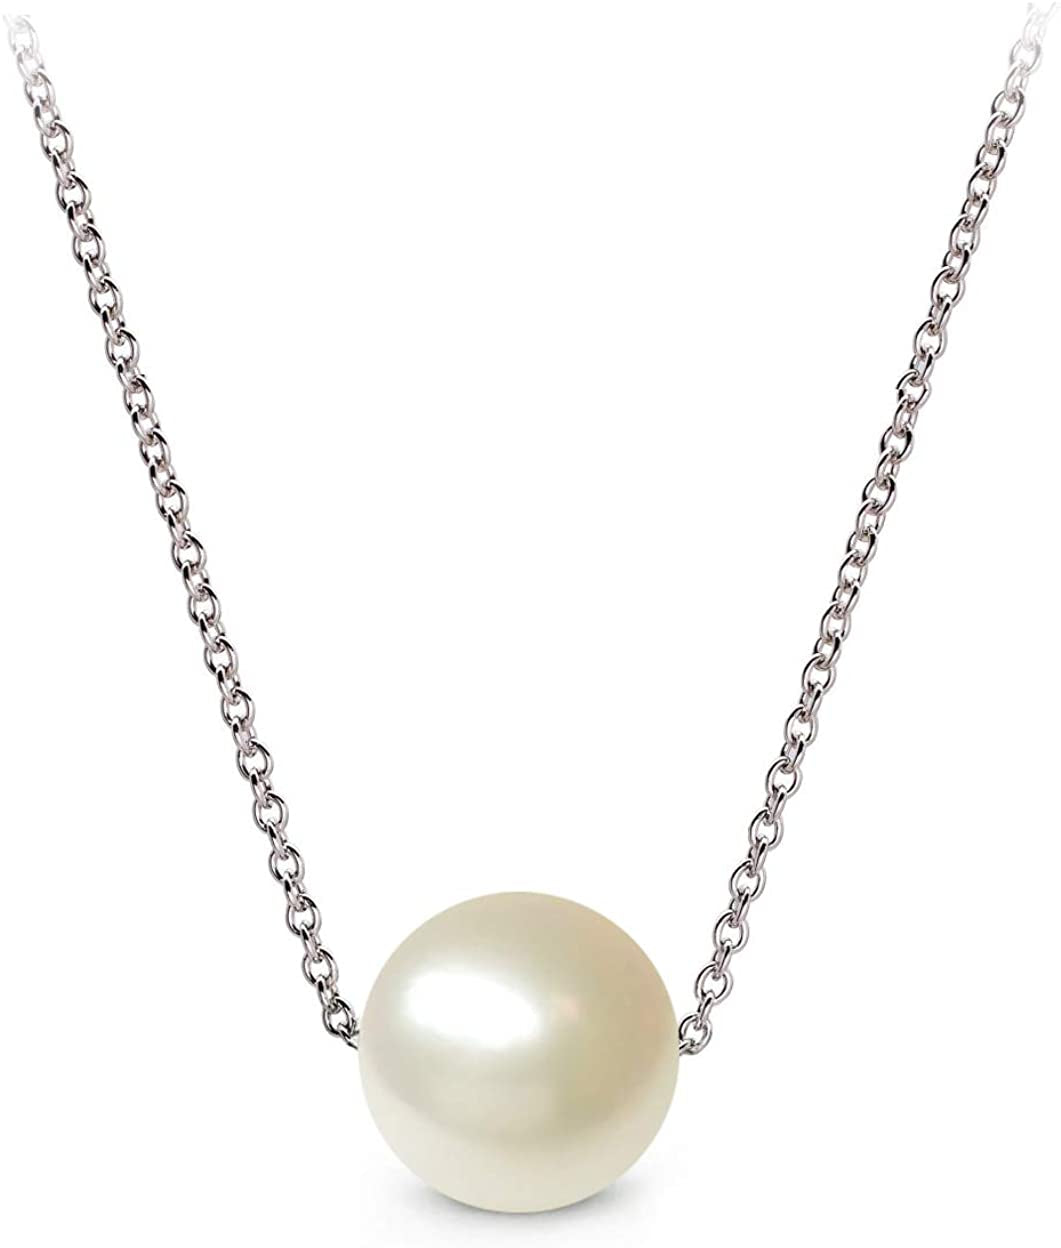 16" Japanese Cream Akoya Cultured Pearl Solitaire Necklace AA+ Quality with Rhodium Plated Sterling Silver Chain